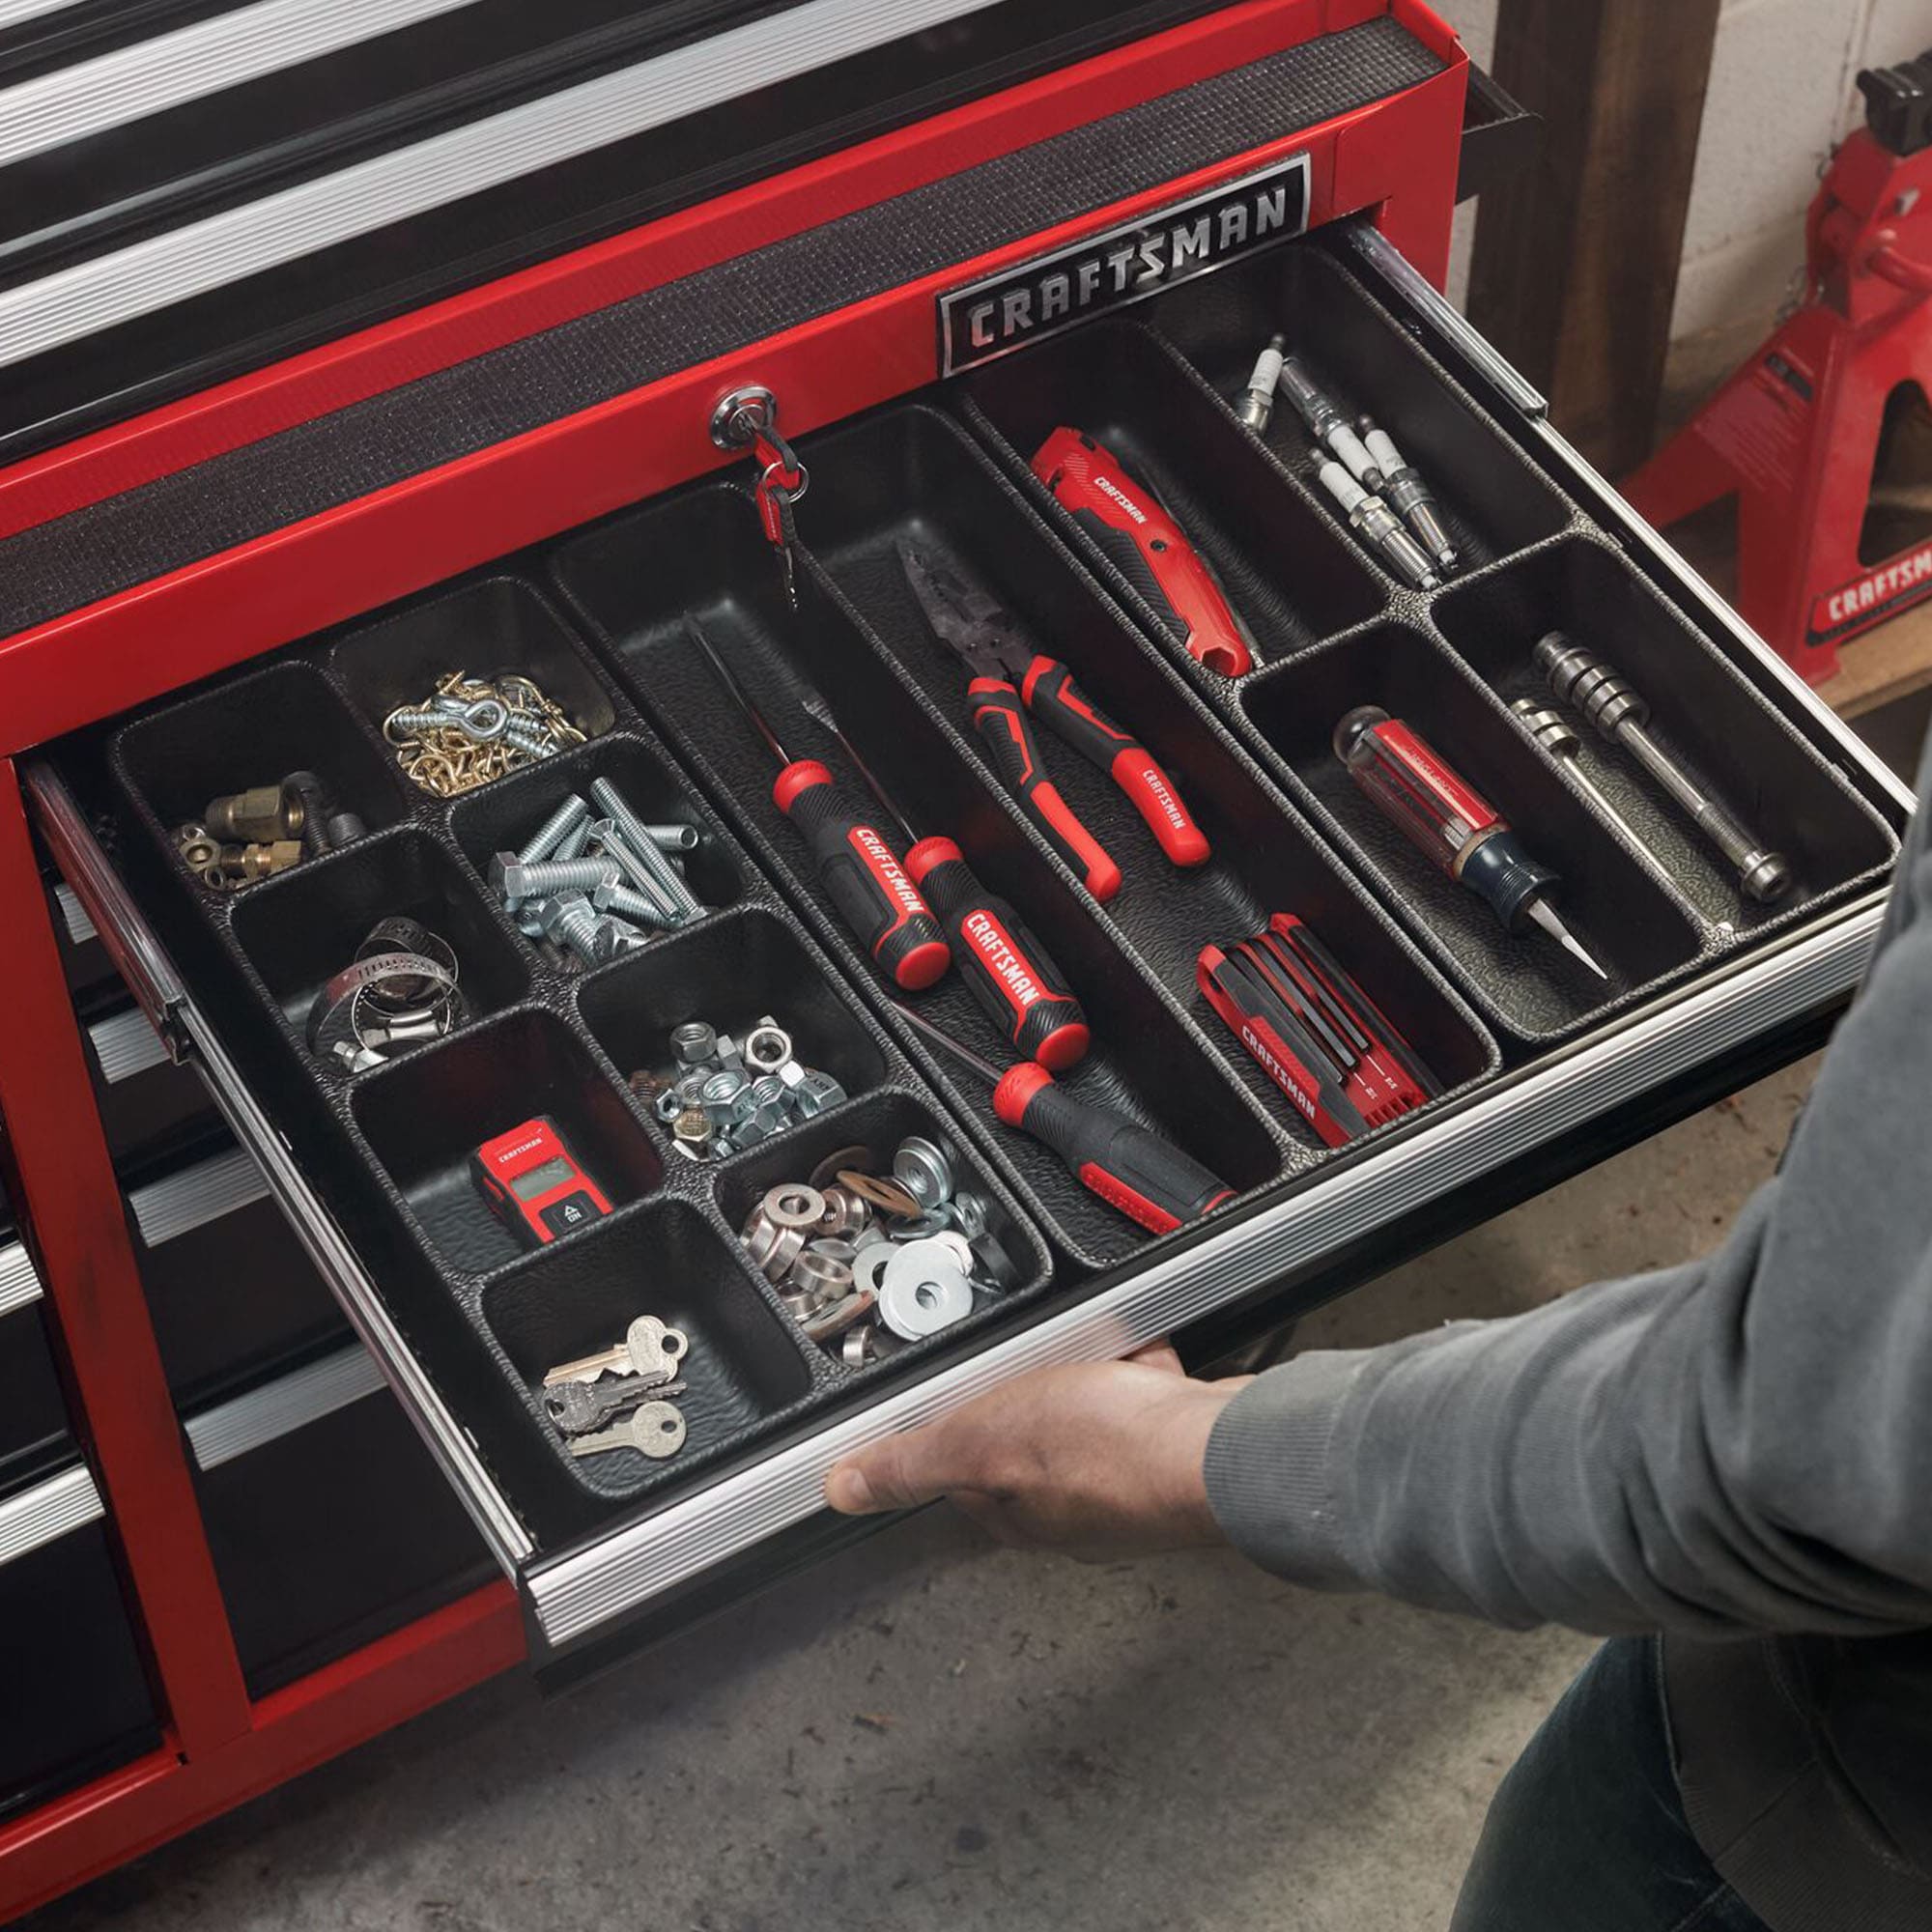 Tool Chest Drawer Organizers, Dividers & Inserts